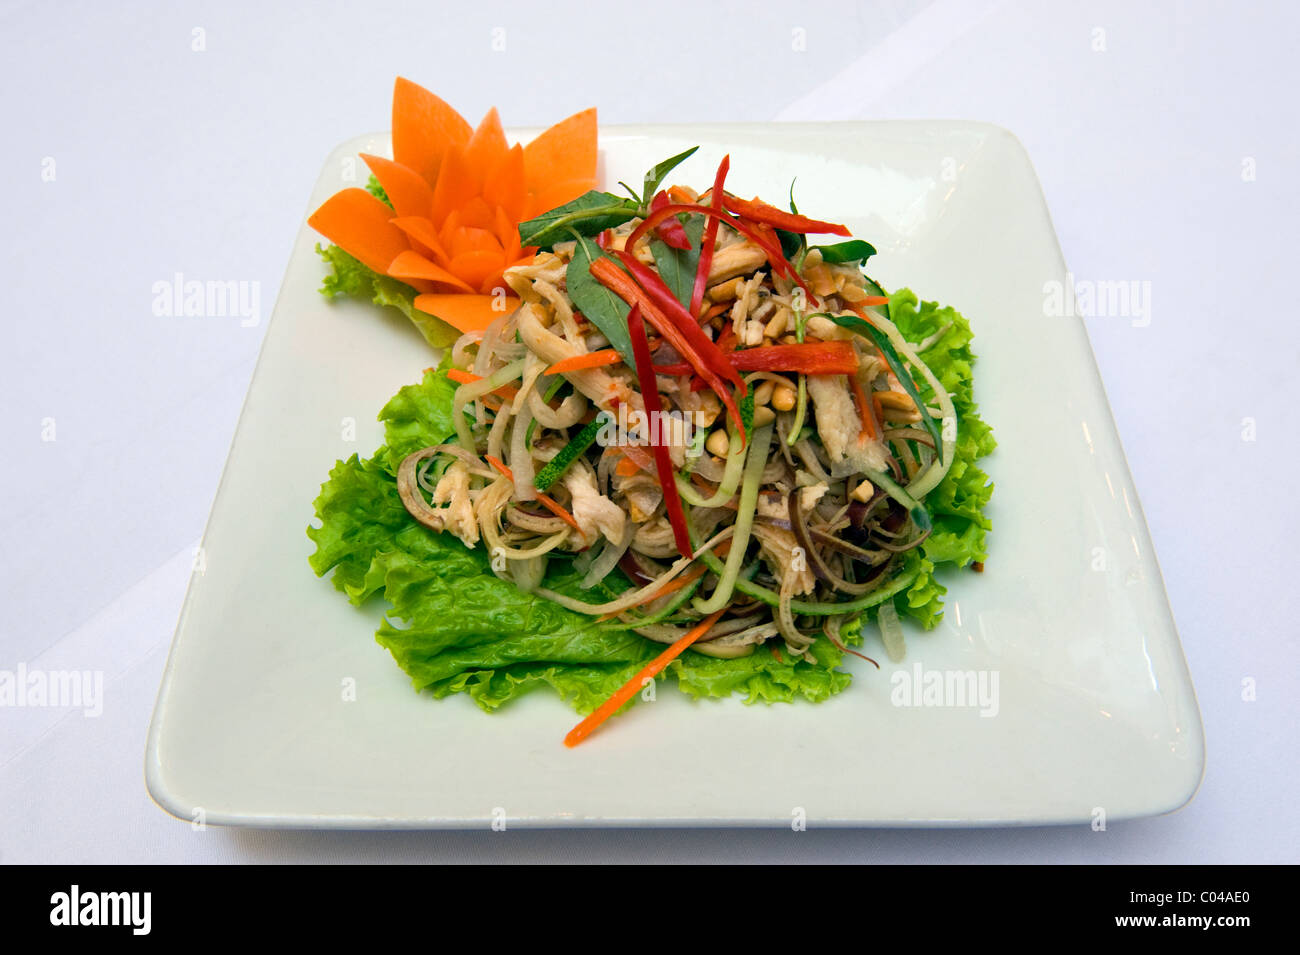 A plate of food from a cookery class in Vietnam Stock Photo